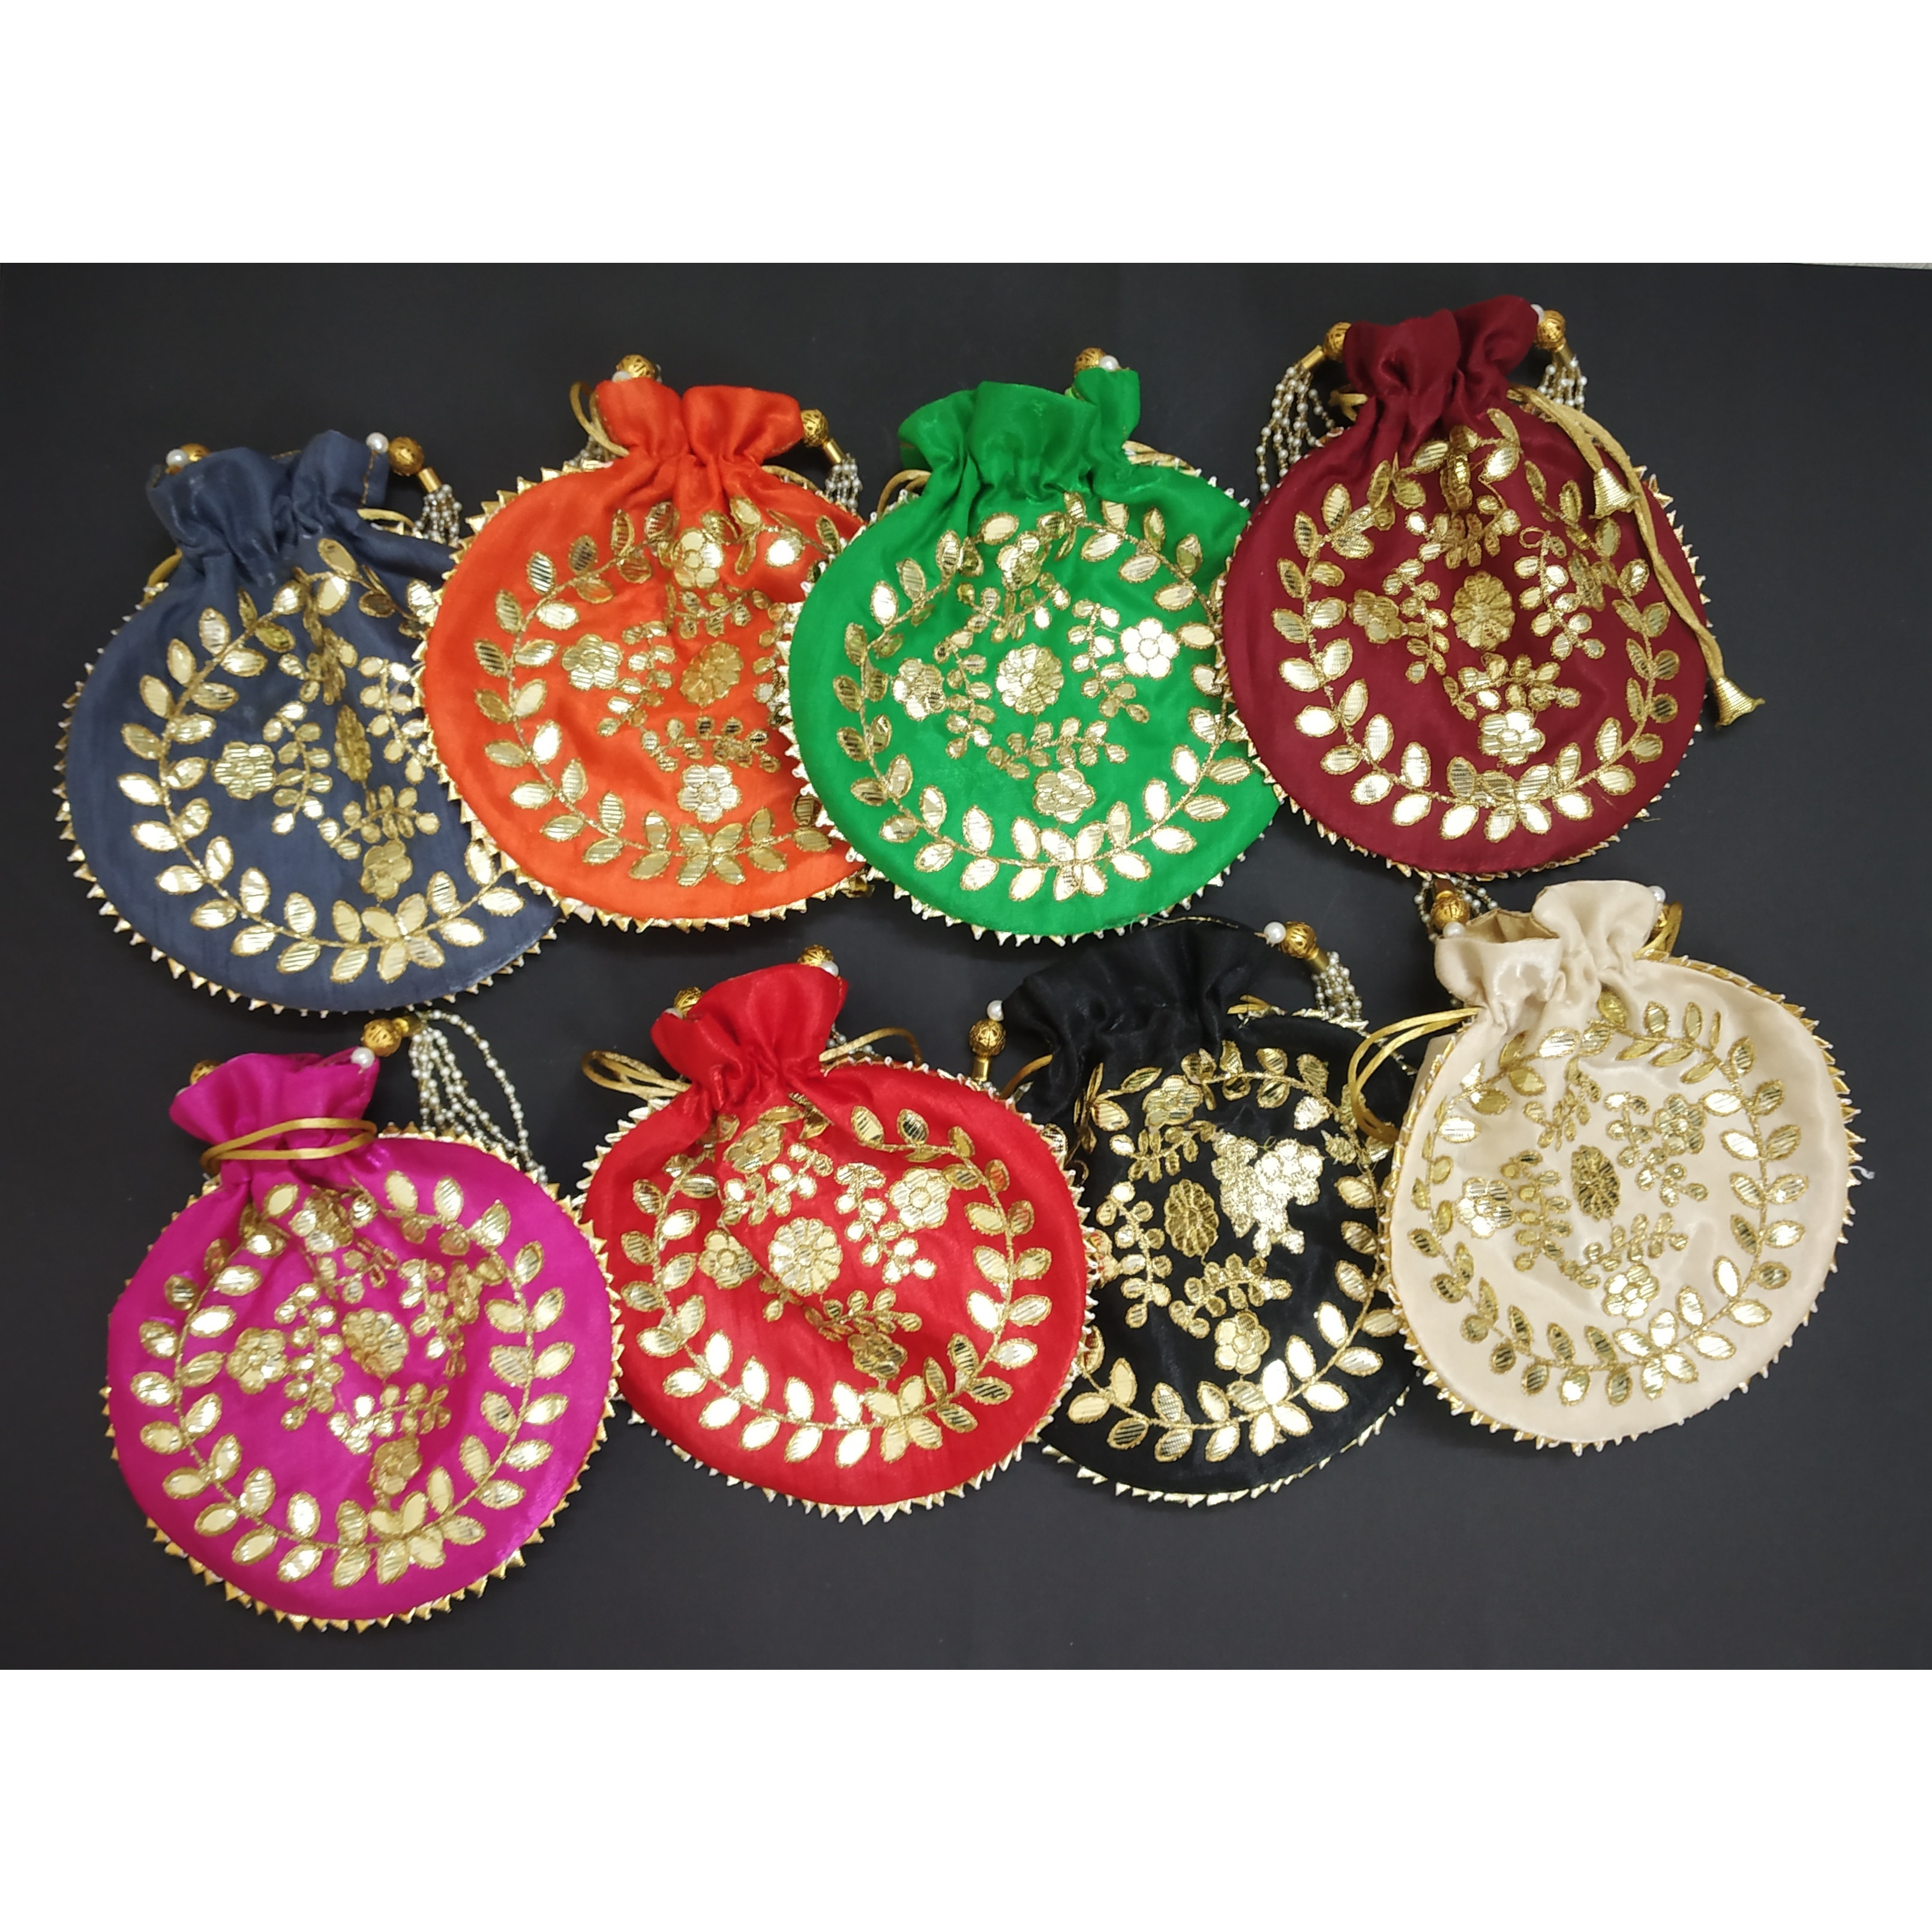 Wholesale Lot Of Indian Handmade Women's Potli Bag Pouch Wedding Favor Mehendi Ceremony Gifts Sangeet Favor Gift For Guests Resell Free Ship